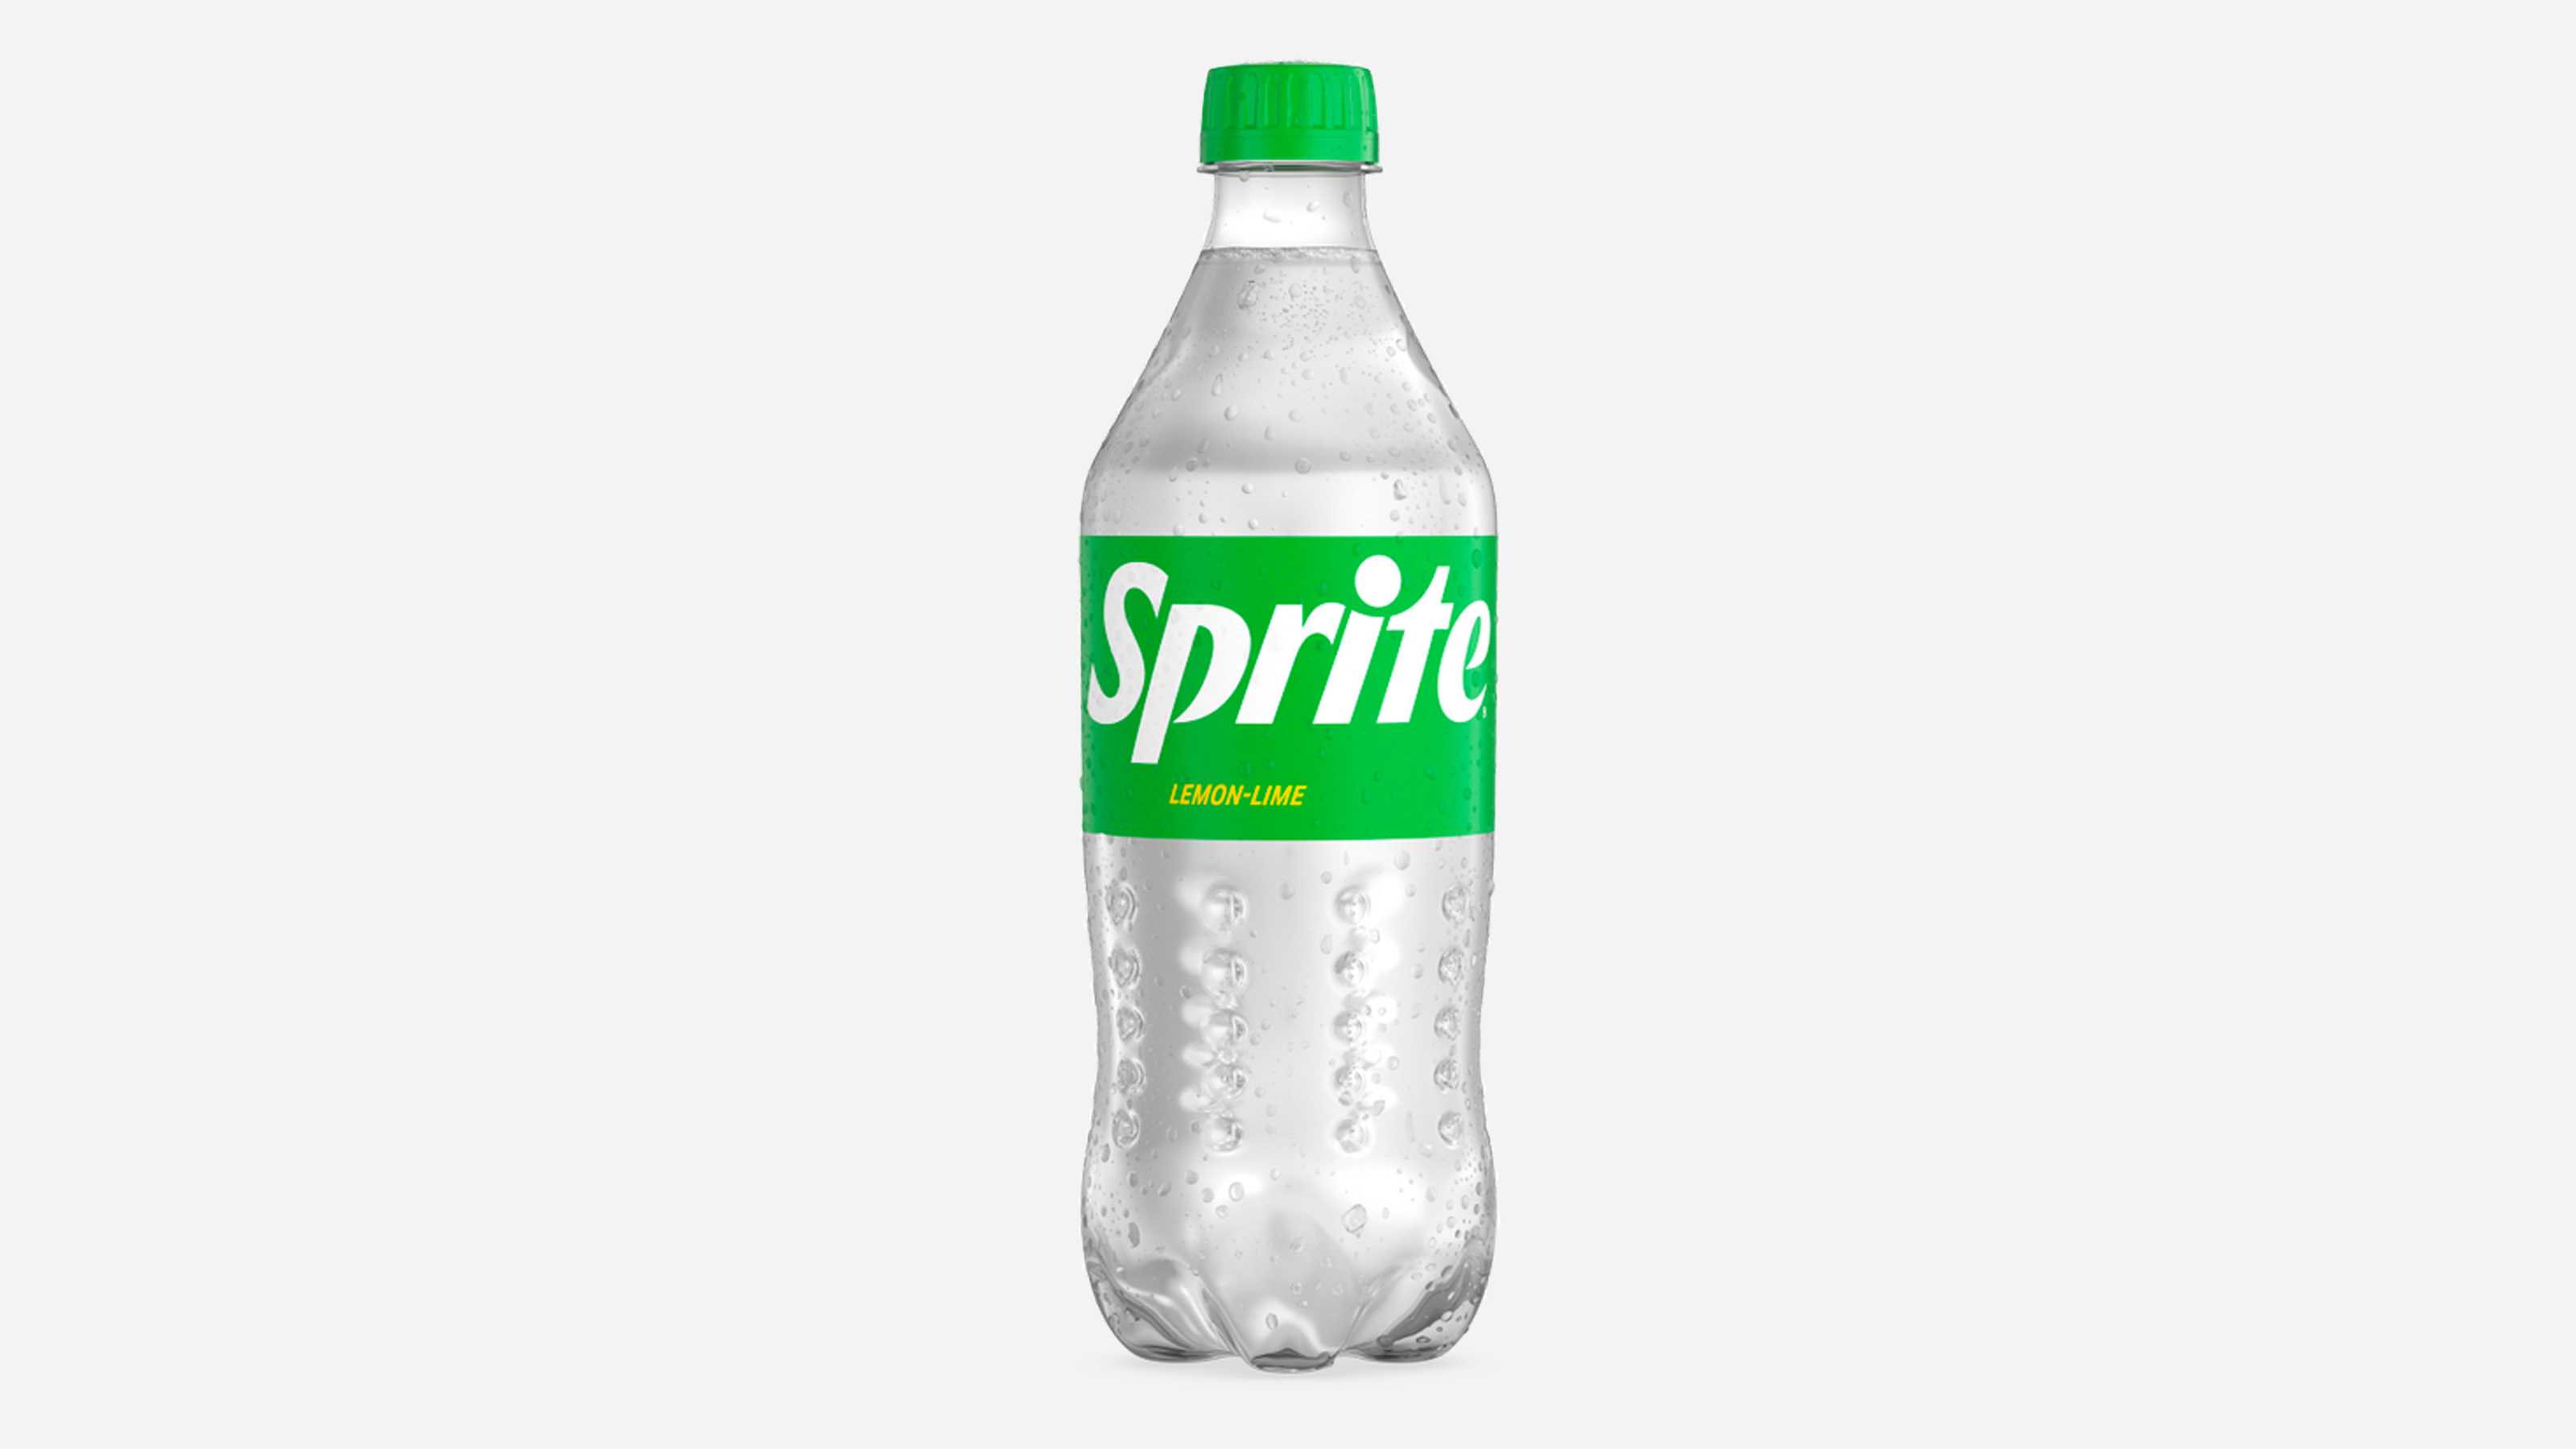 2020 SPRITE NEW LOOK ONE LABEL 8 OUNCE GLASS  COCA   COLA PRODUCT BOTTLE 